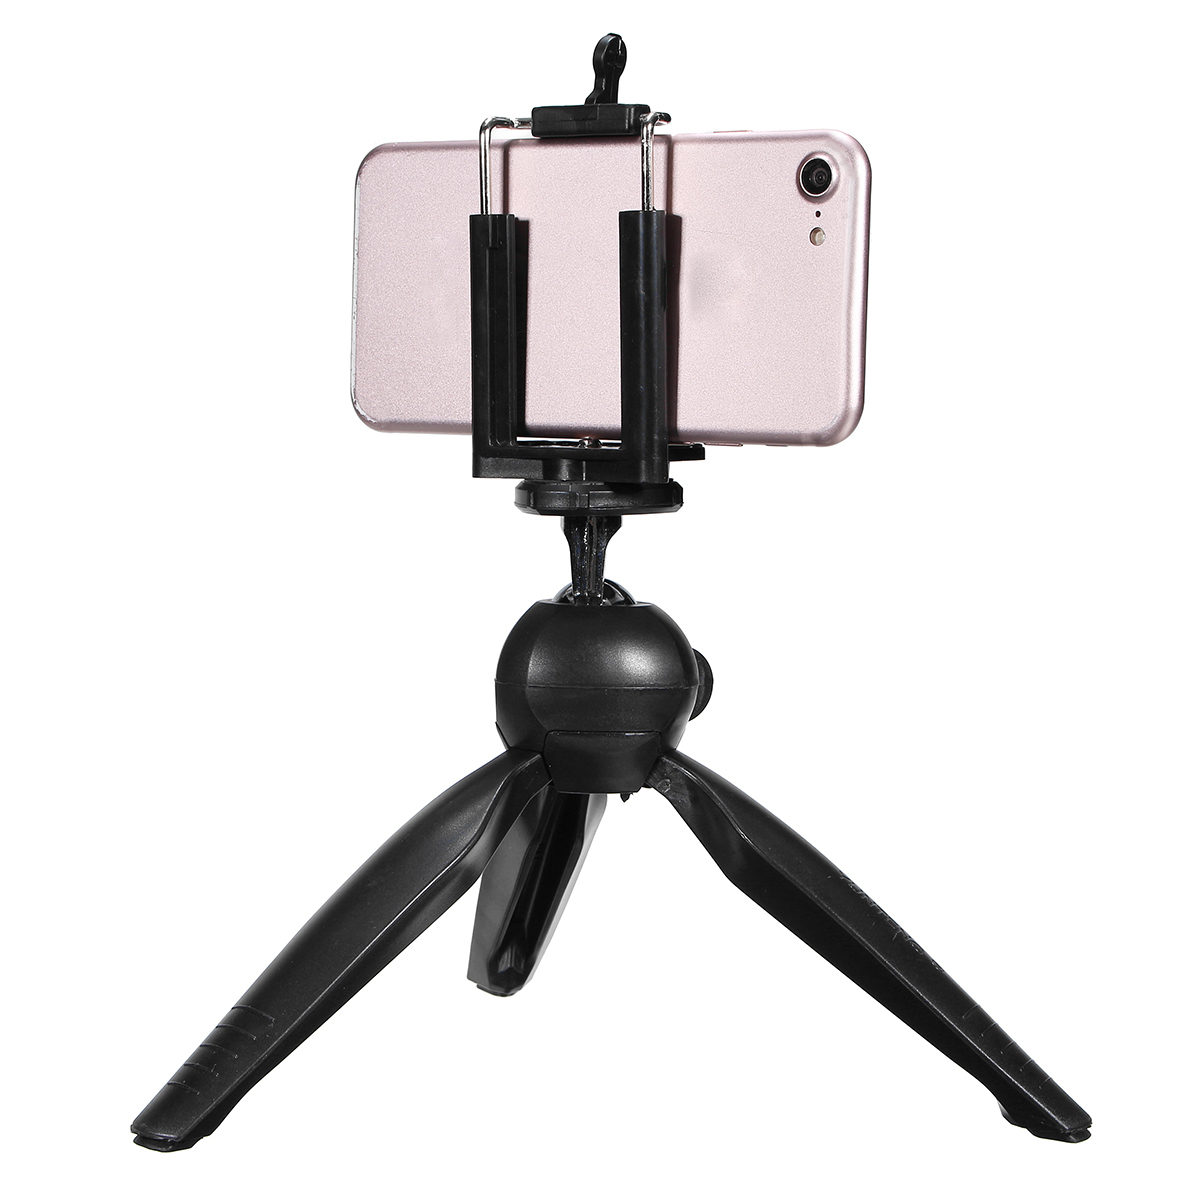 bluetooth-Wireless-Remote-Control-Extendable-Handheld-Selfie-Stick-Monopod--Tripod-for-Camera-Mobile-1340611-10